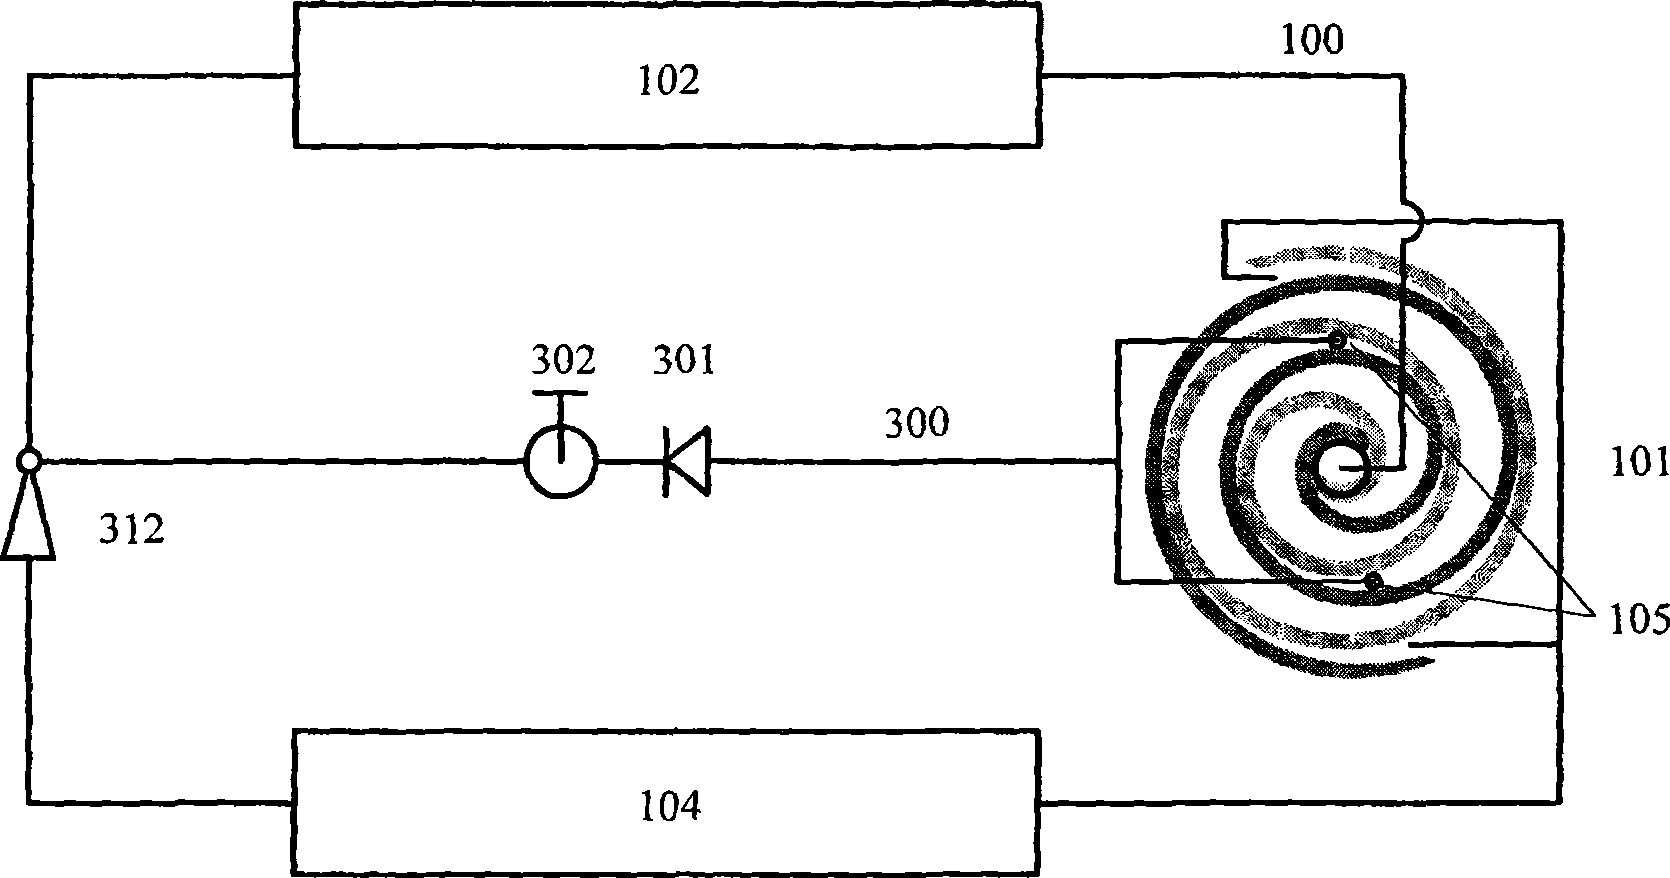 Capacity adjustable vortex compressor refrigeration system with main return loop installed with ejector